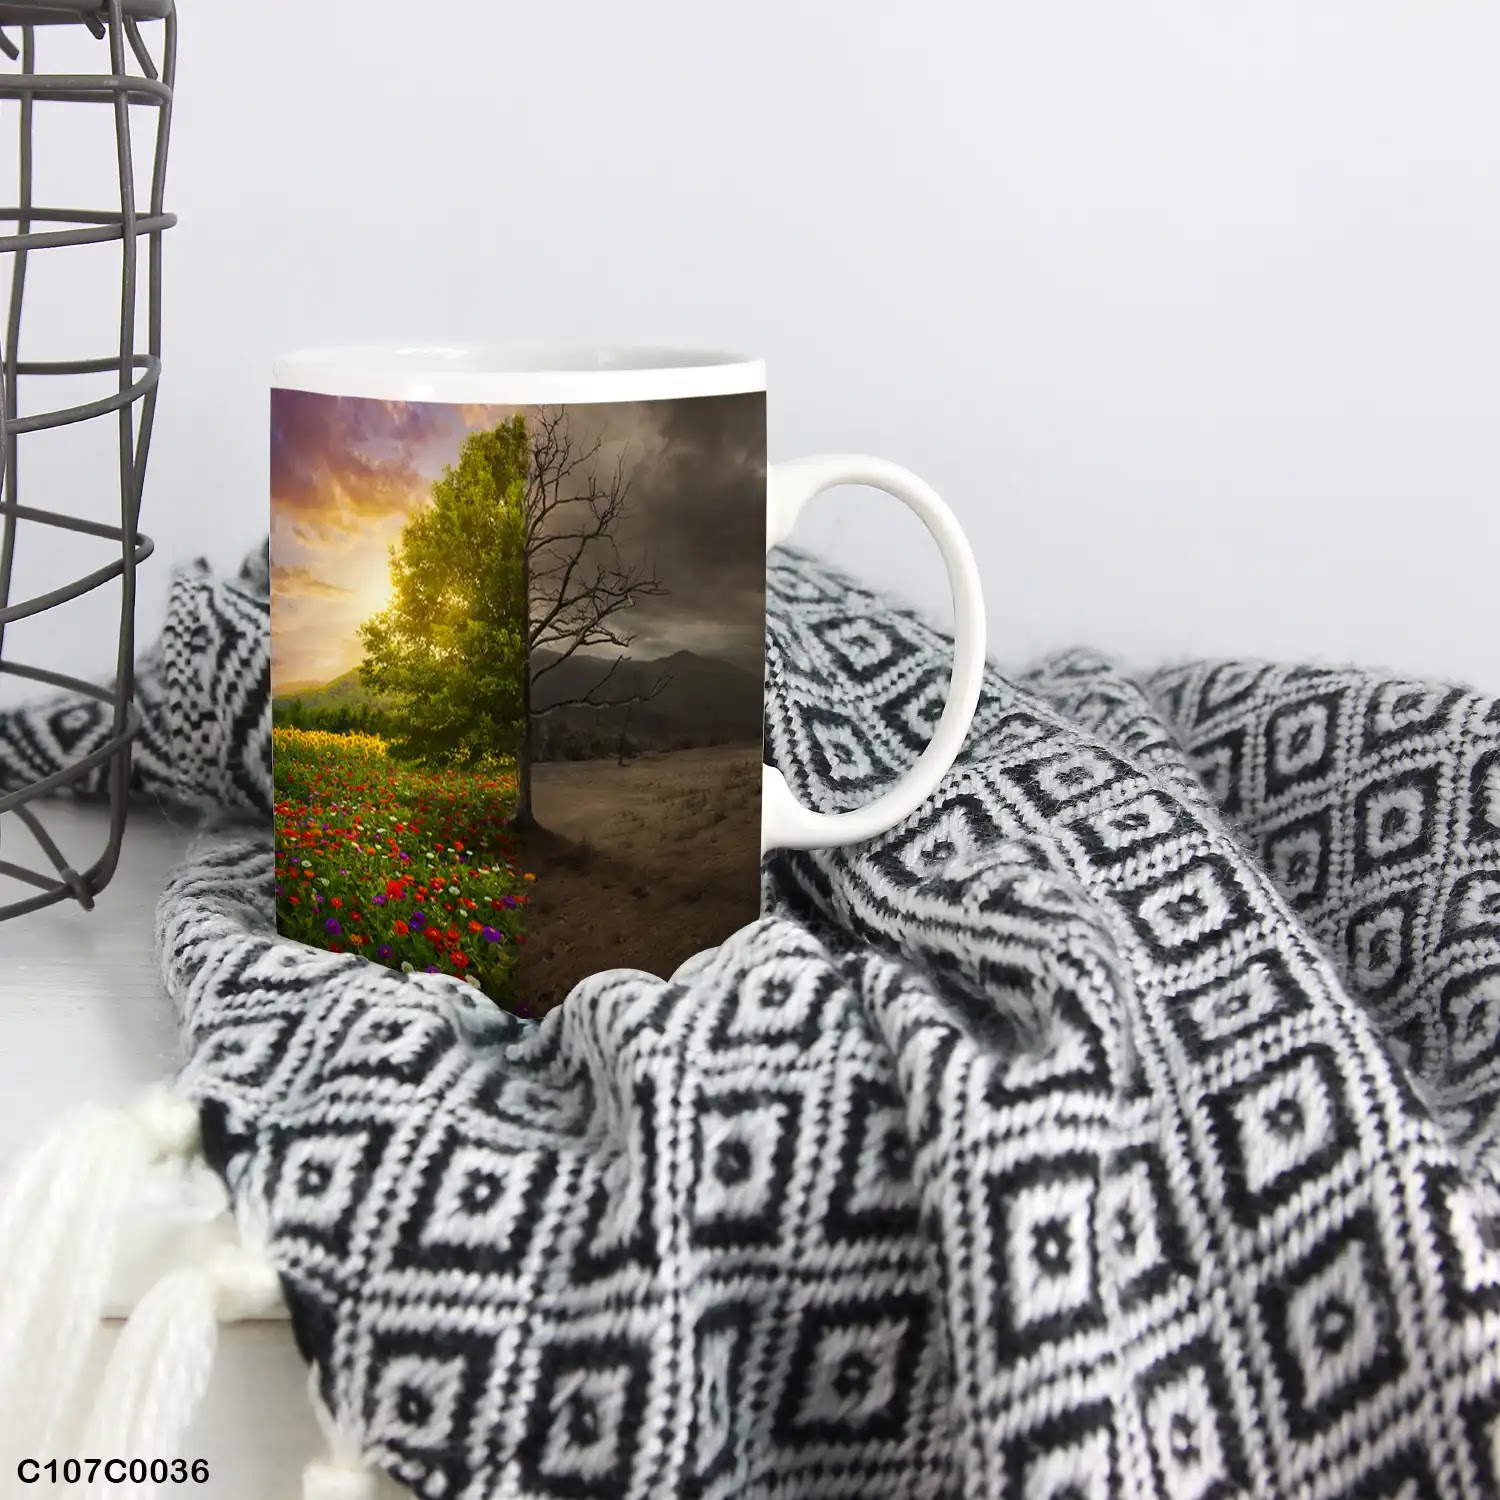 A mug (cup) printed with an image of a tree in Autumn and spring